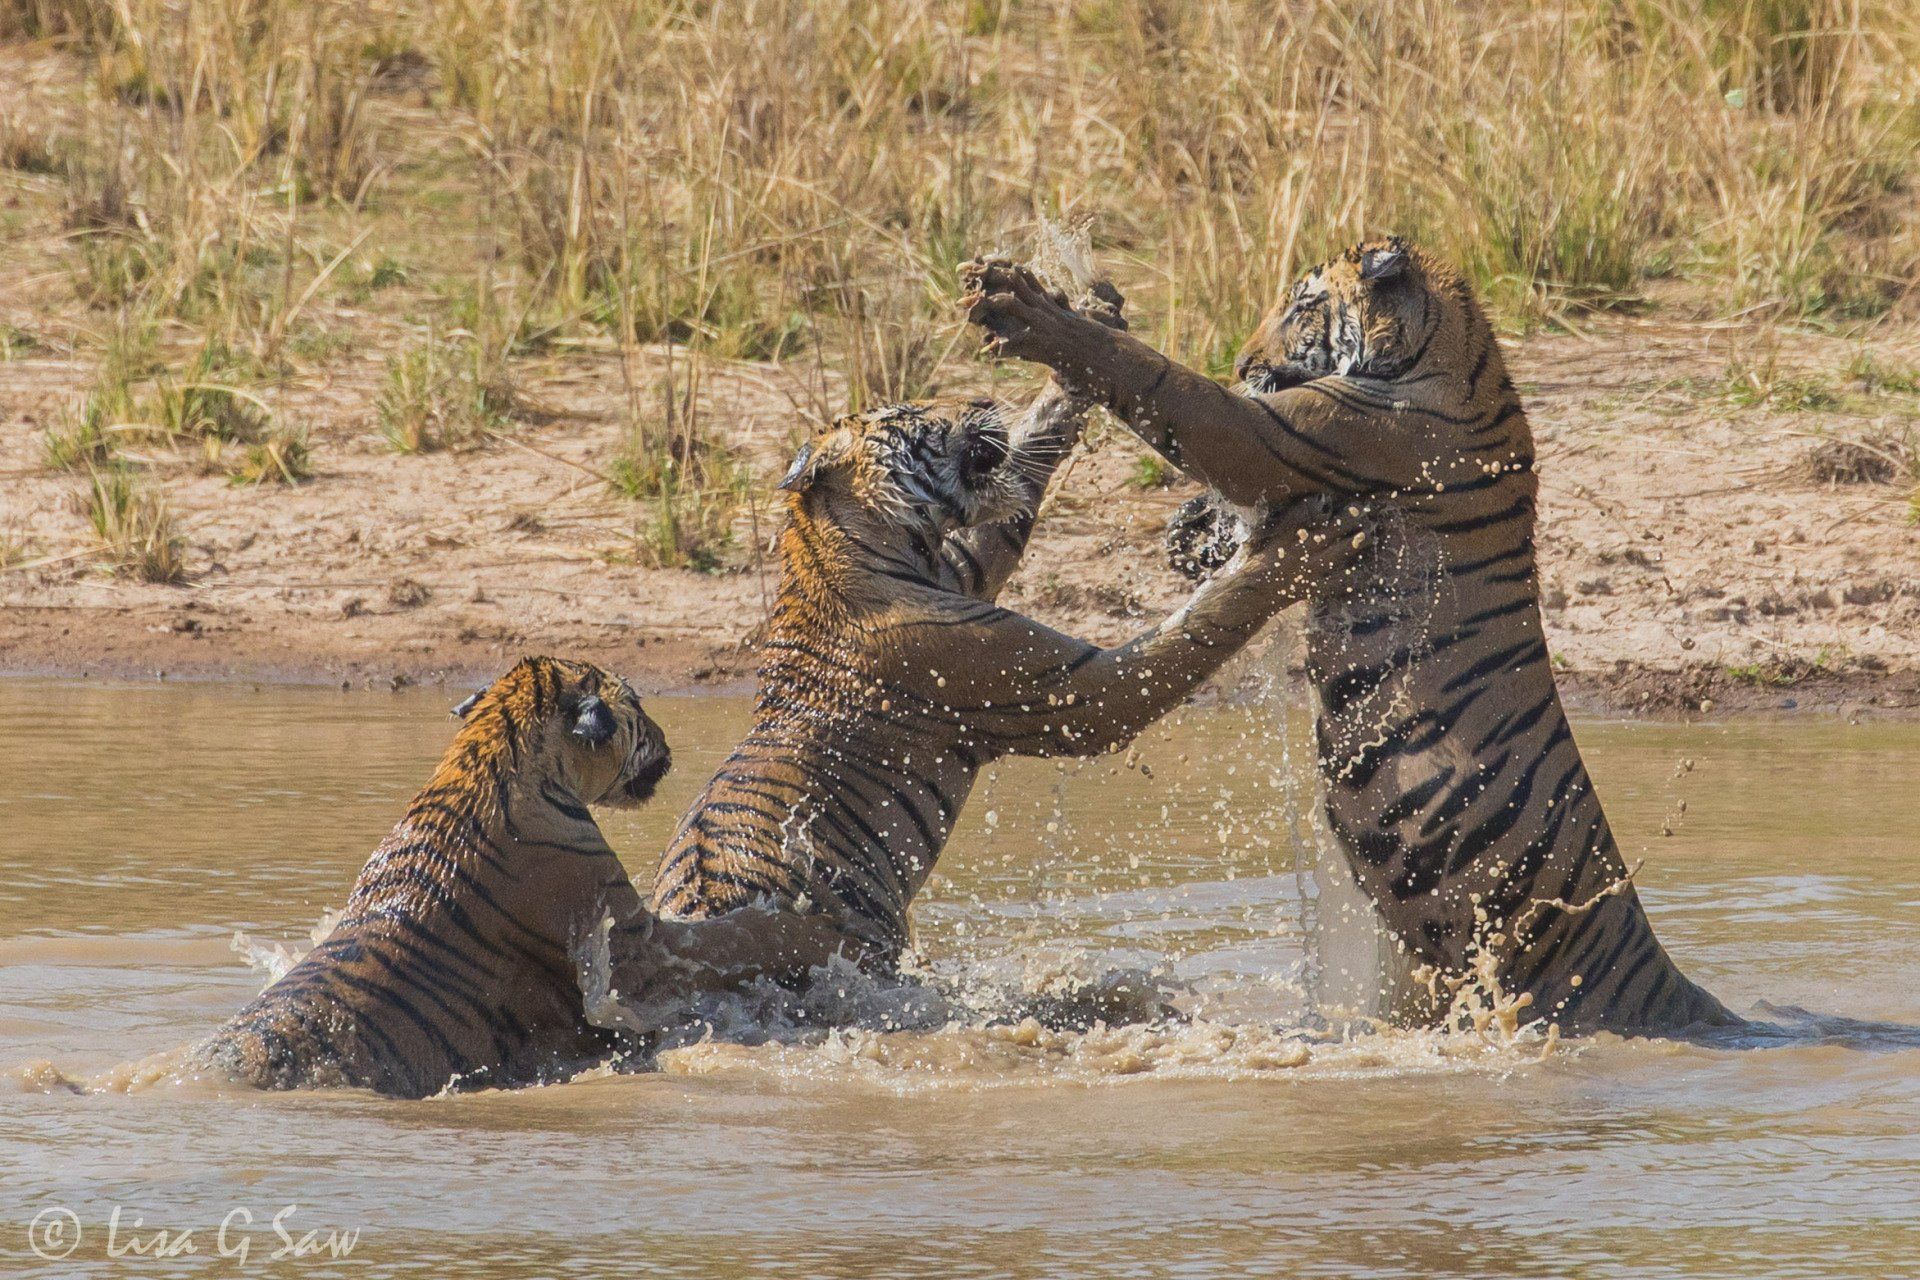 Three Tiger cubs playing fight in the waterhole